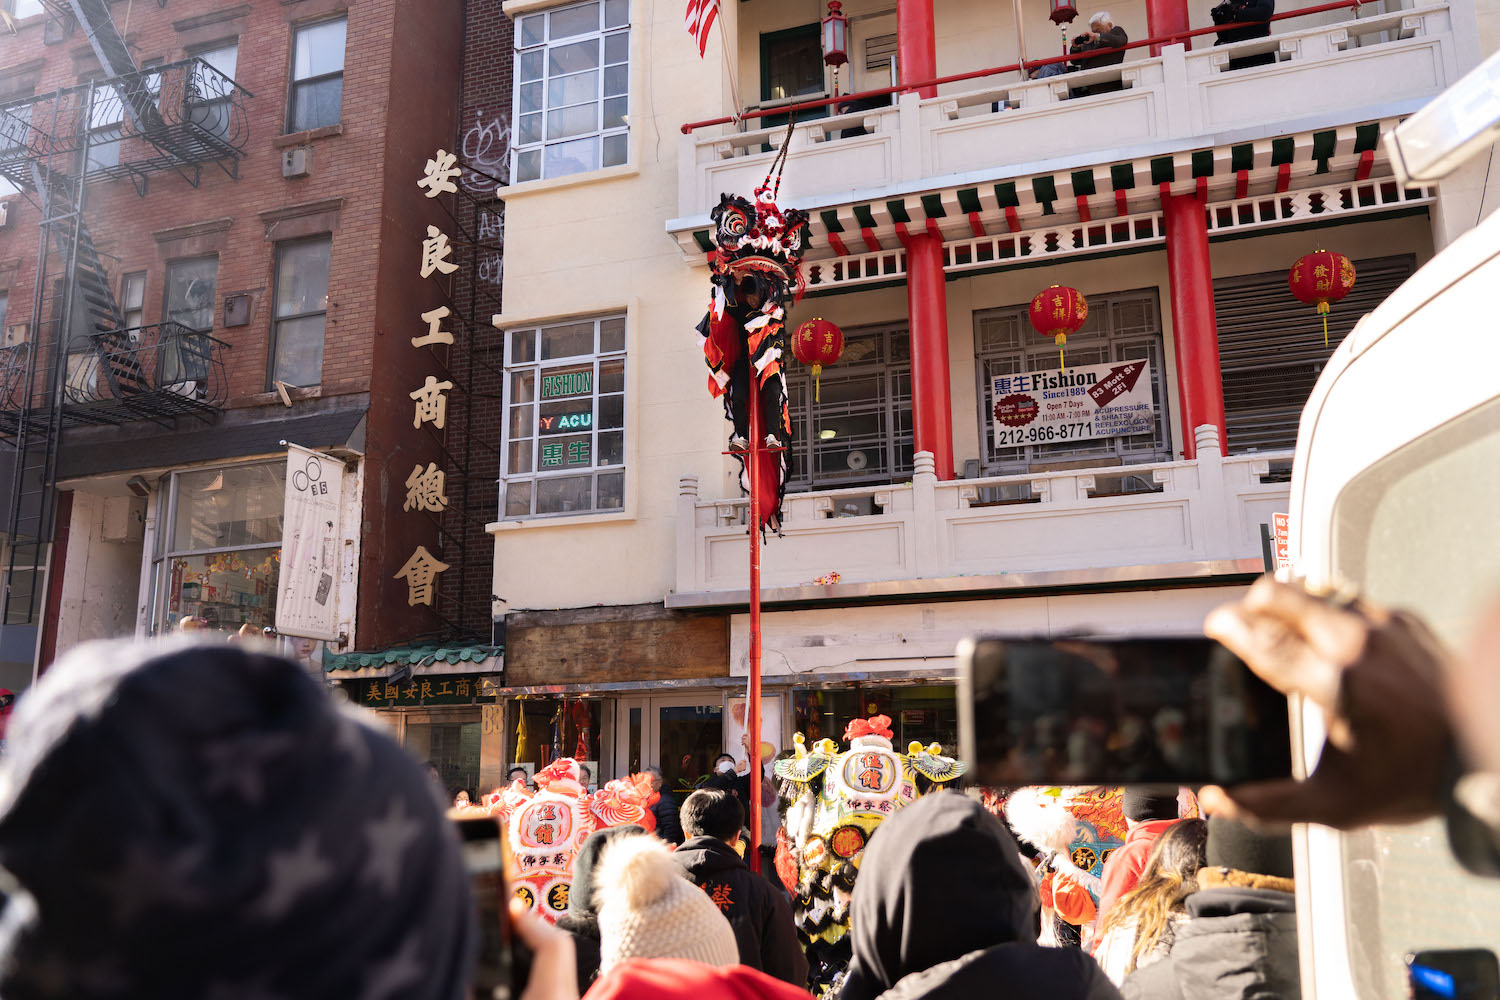 A lion dancer standing on top of a two-story tall pole in front of a crowd on the street.